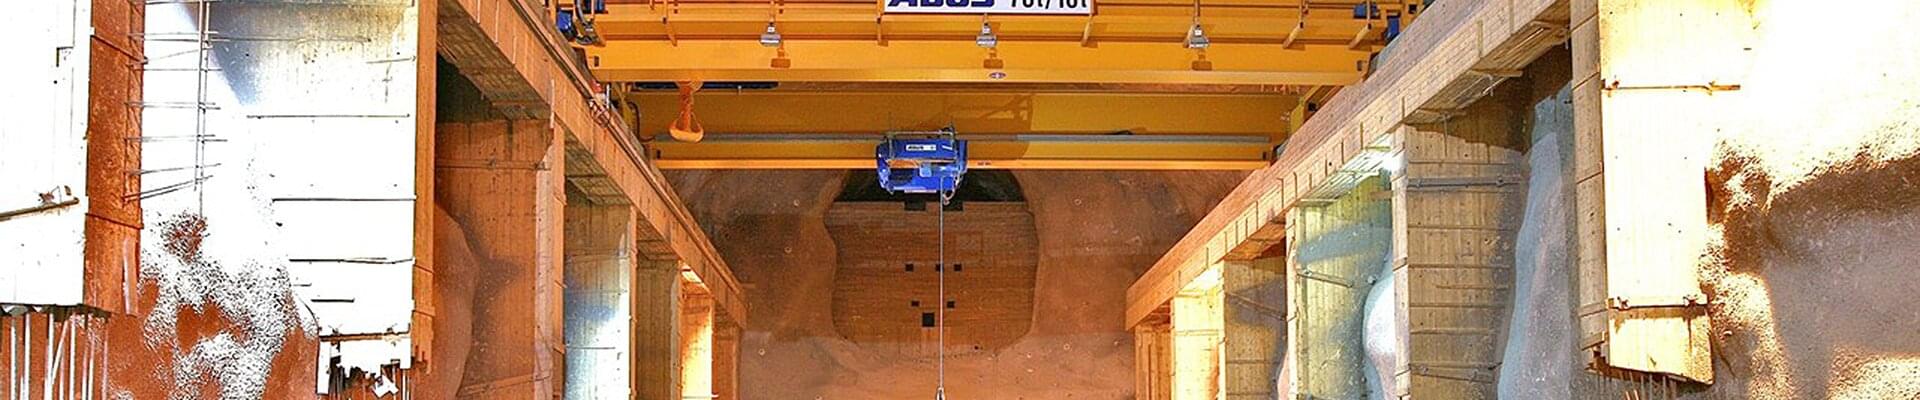 Double-girder overhead traveling crane in box girder design with a load capacity of 75 t and a span of 12.5 m at a utility company in Norway